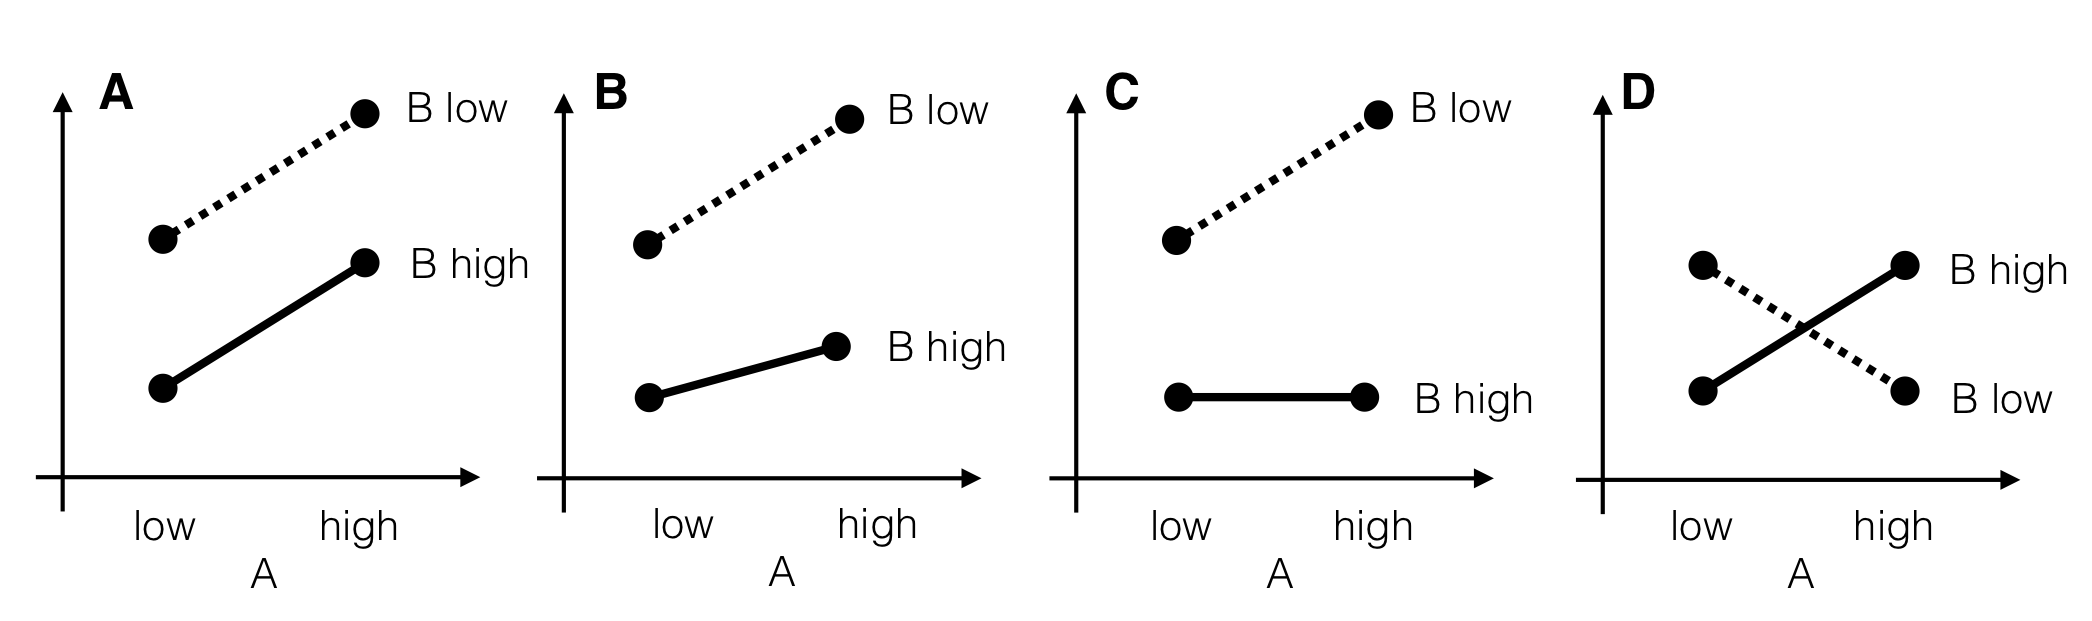 Four stylized scenarios with different interactions. A: Parallel lines indicate no interaction and an additive model. B: Small interaction and nonzero main effects. Factor B attenuates effect of factor A. C: Strongly pronounced interaction. Factor B on high level completely compensates effect of factor A. D: Complete effect reversal; all information on factor effects is in the interaction.